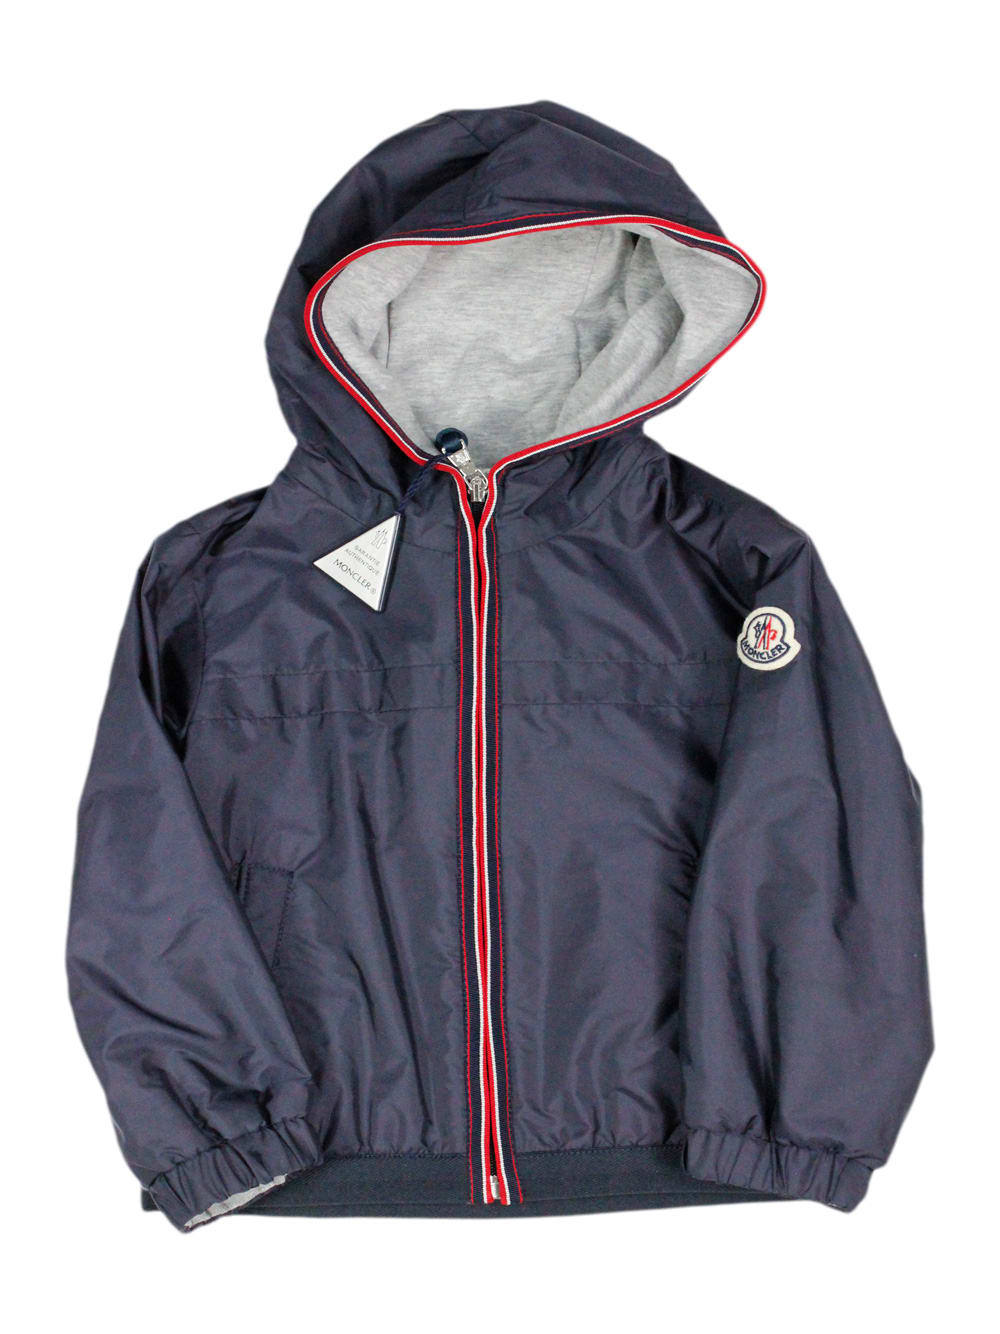 Moncler Kids' Windproof Jacket In Technical Fabric With Hood And Cotton Lining. Colored Profile On The Zip And Hoo In Blu